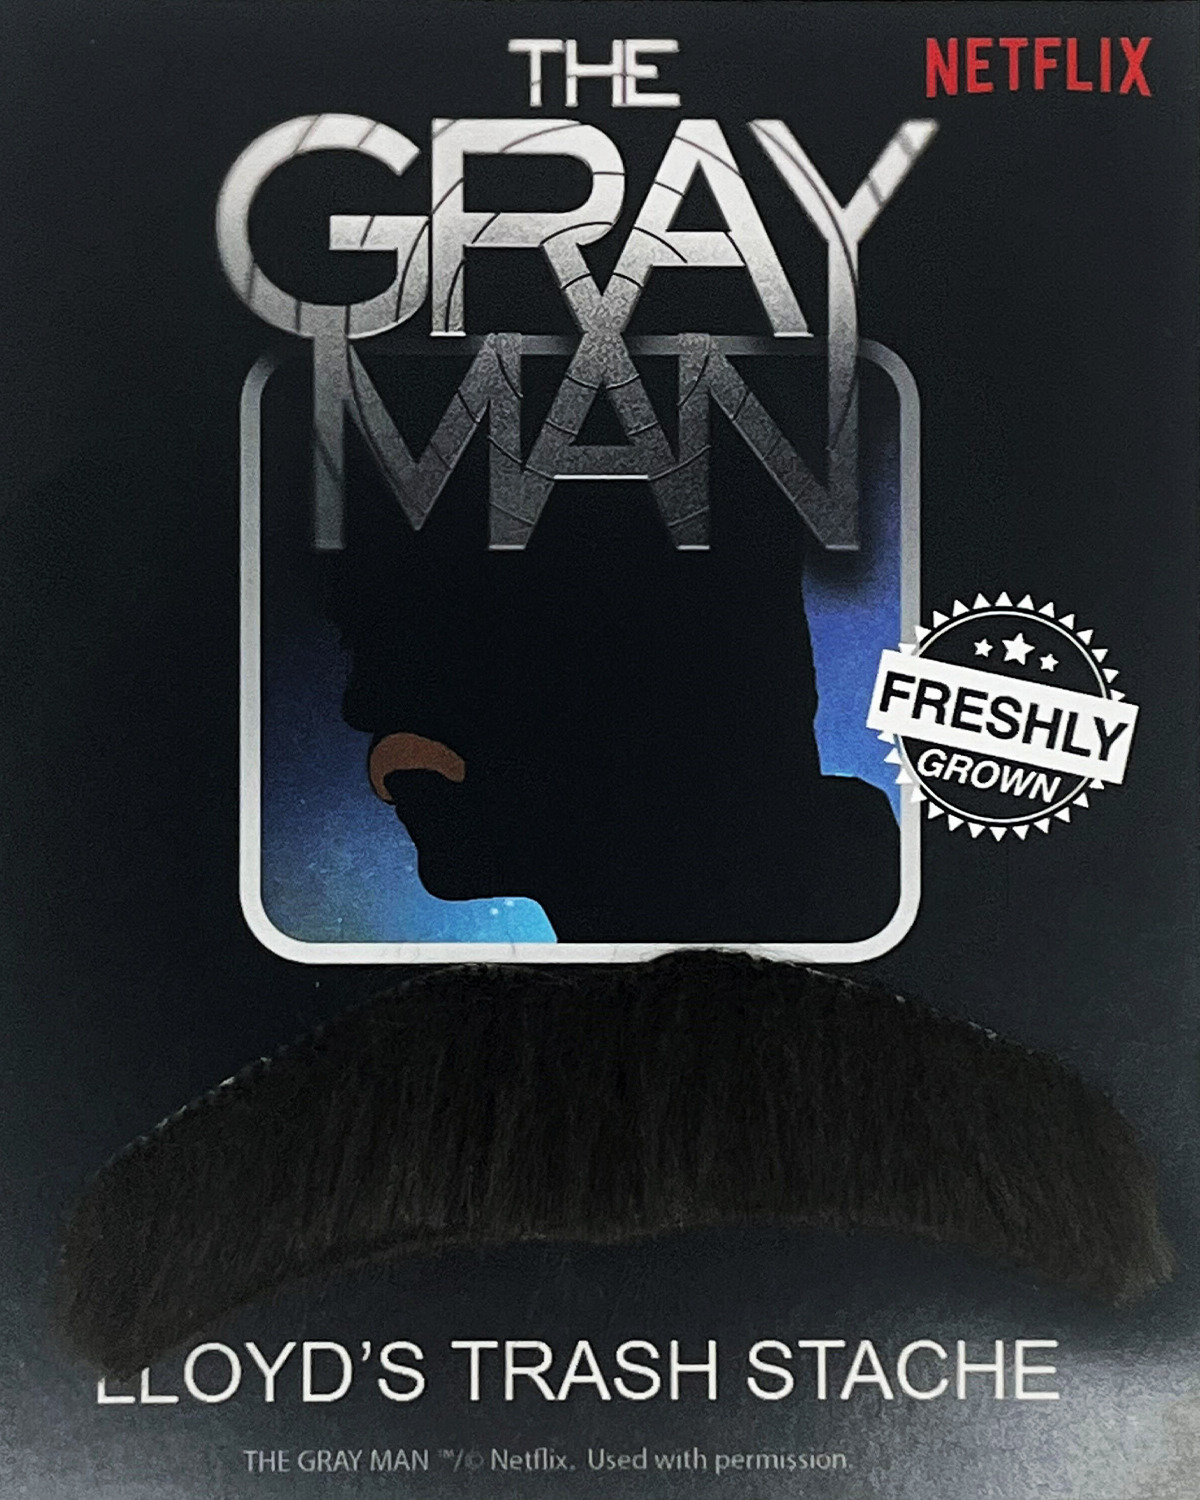 The Gray Man cast and crew's education and background